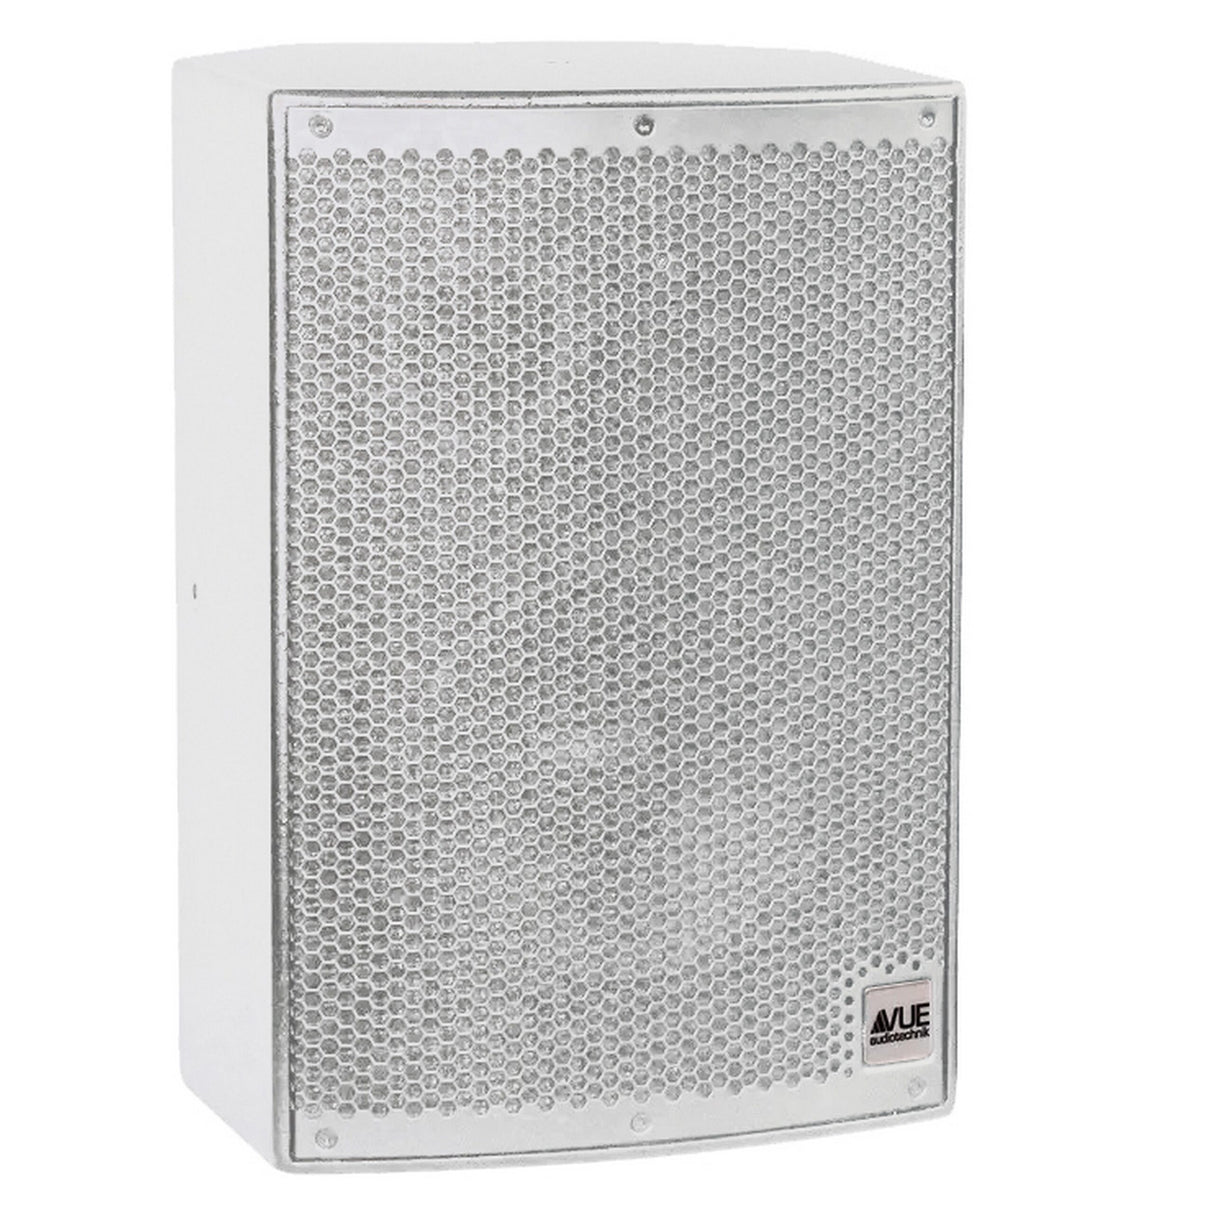 VUE Audiotechnik i-8a Two-Way Foreground Powered Loudspeaker, White